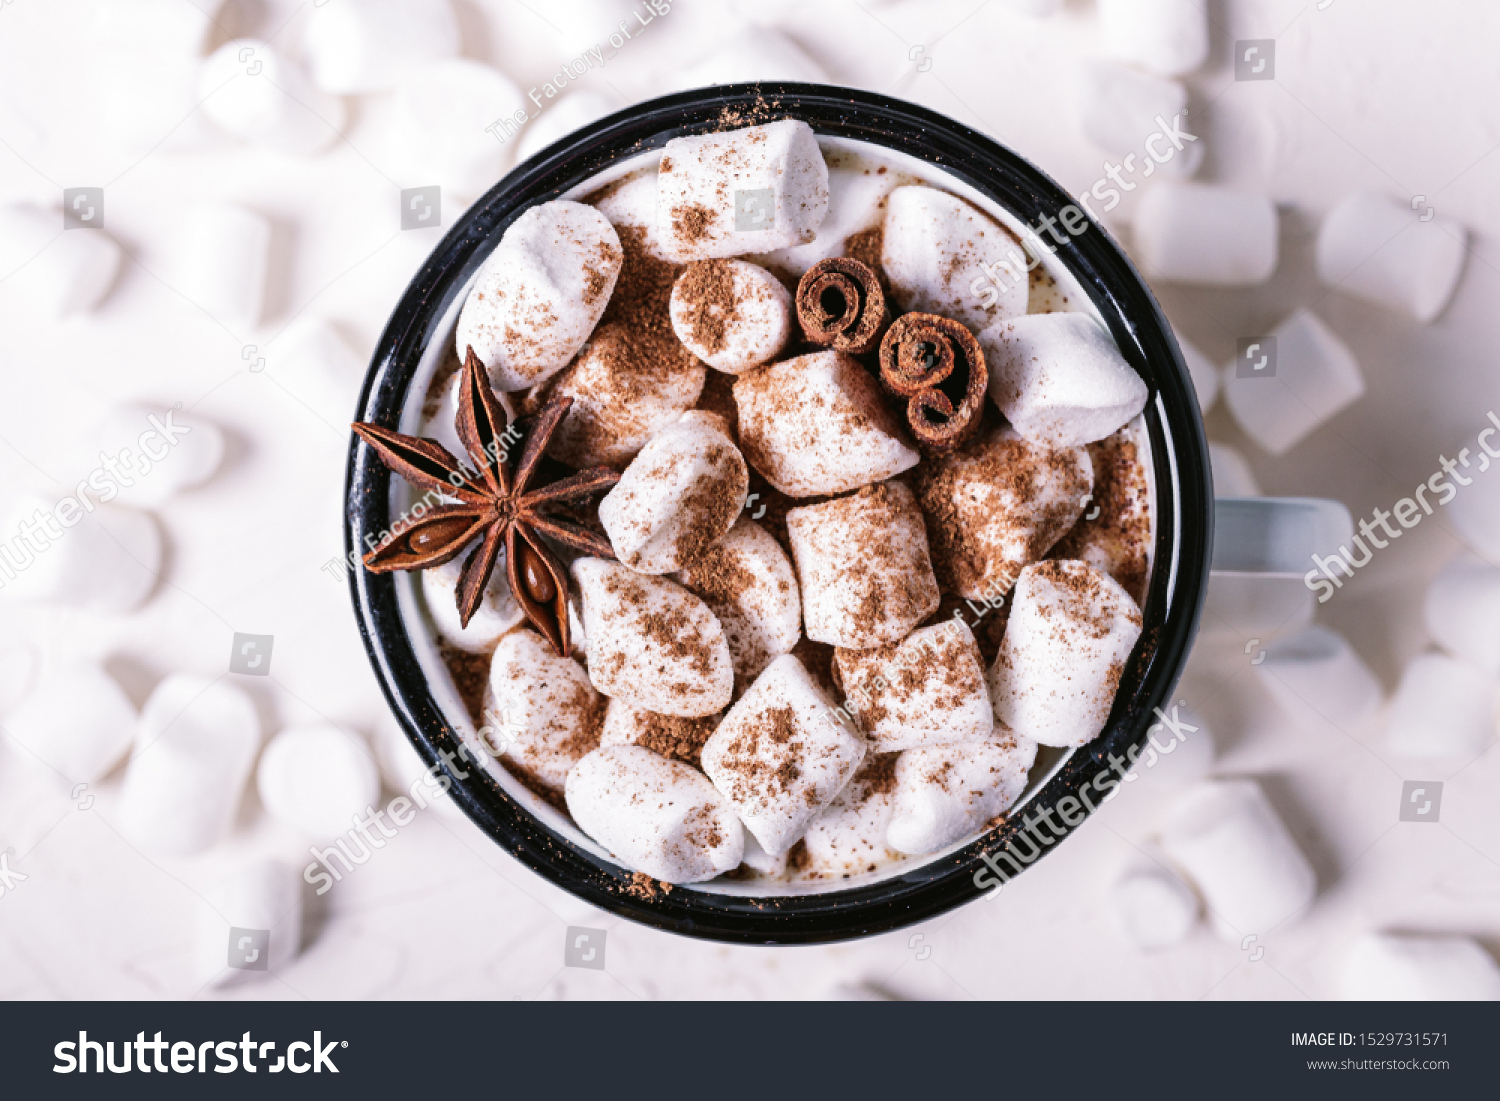 Metal mug of hot chocolate with marshmallows on white background. Сinnamon and star anise. #1529731571